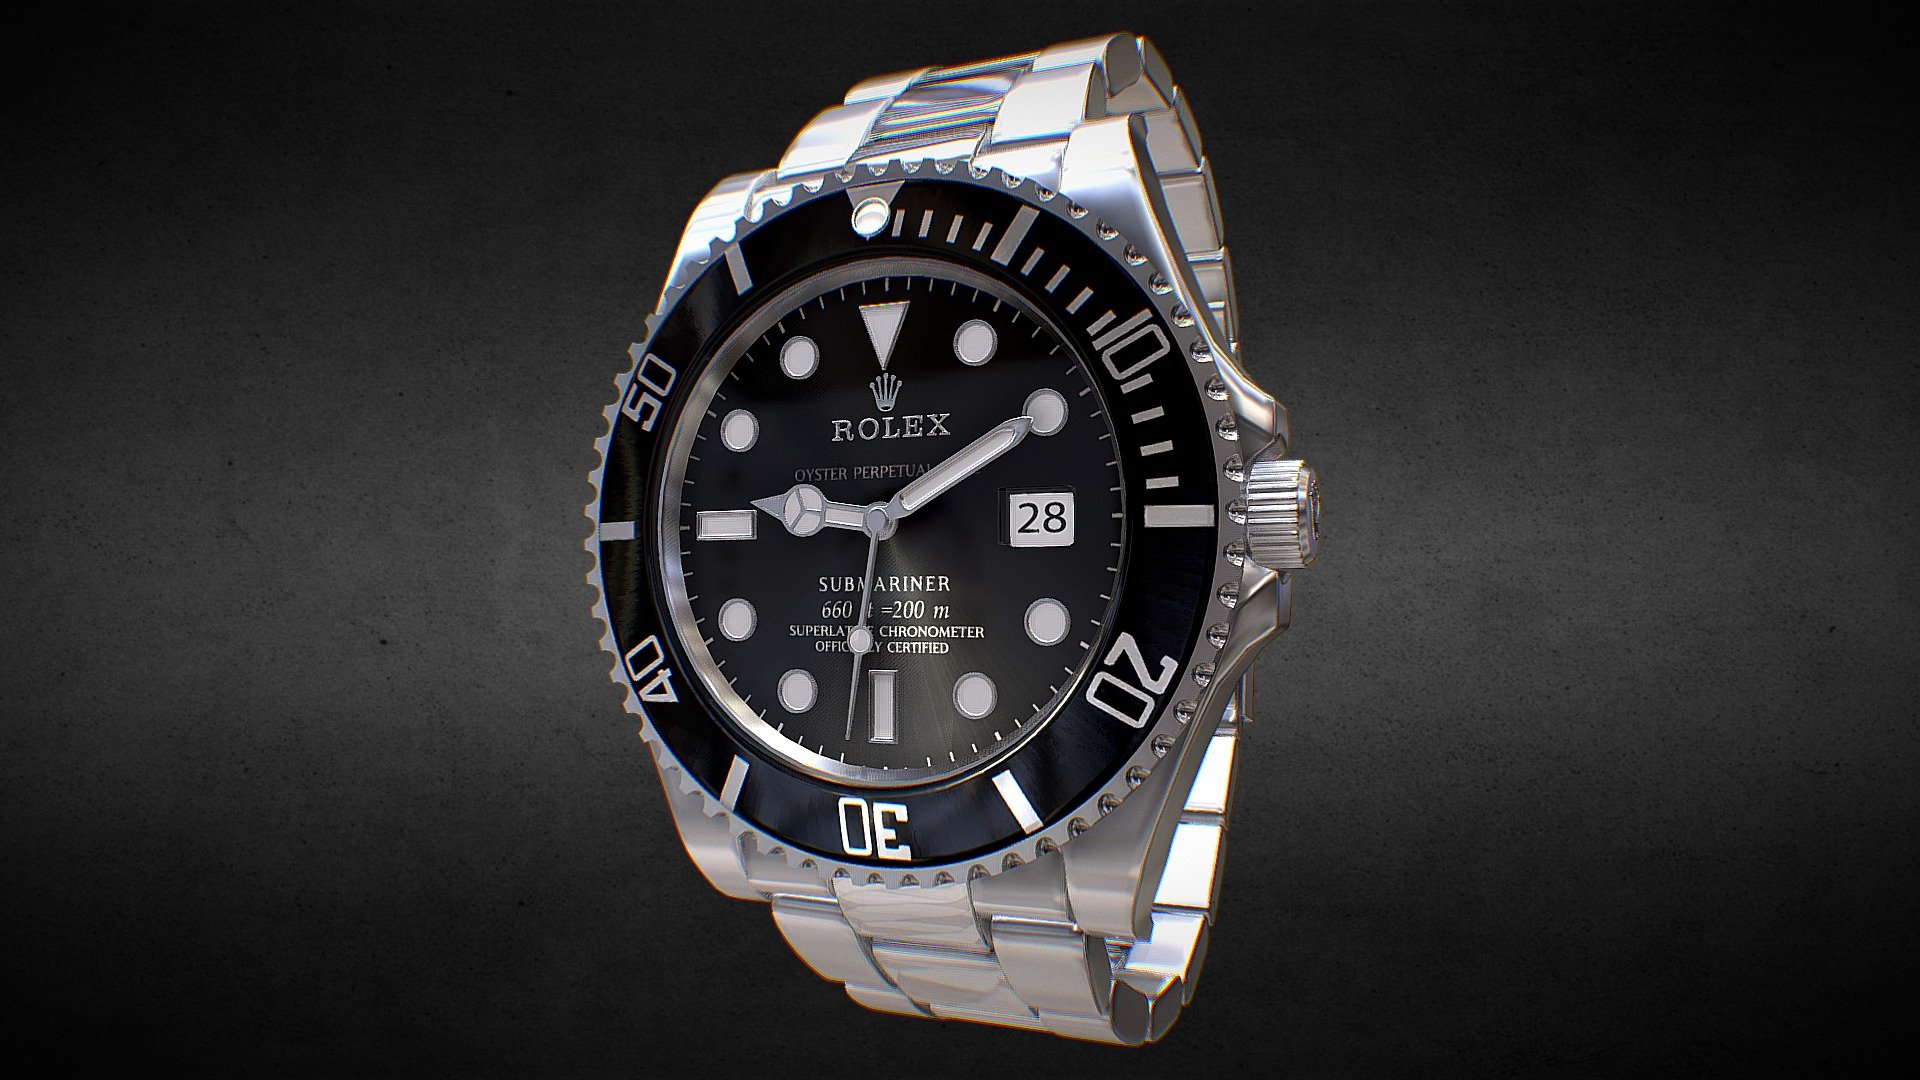 Awesome stainless steel Rolex Submariner Date Bleck  watch․
Use for Unreal Engine 4 and Unity3D. Try in augmented reality in the AR-Watches app. 
Links to the app: Android, iOS

Currently available for download in FBX format.

3D model developed by AR-Watches

Disclaimer: We do not own the design of the watch, we only made the 3D model 3d model